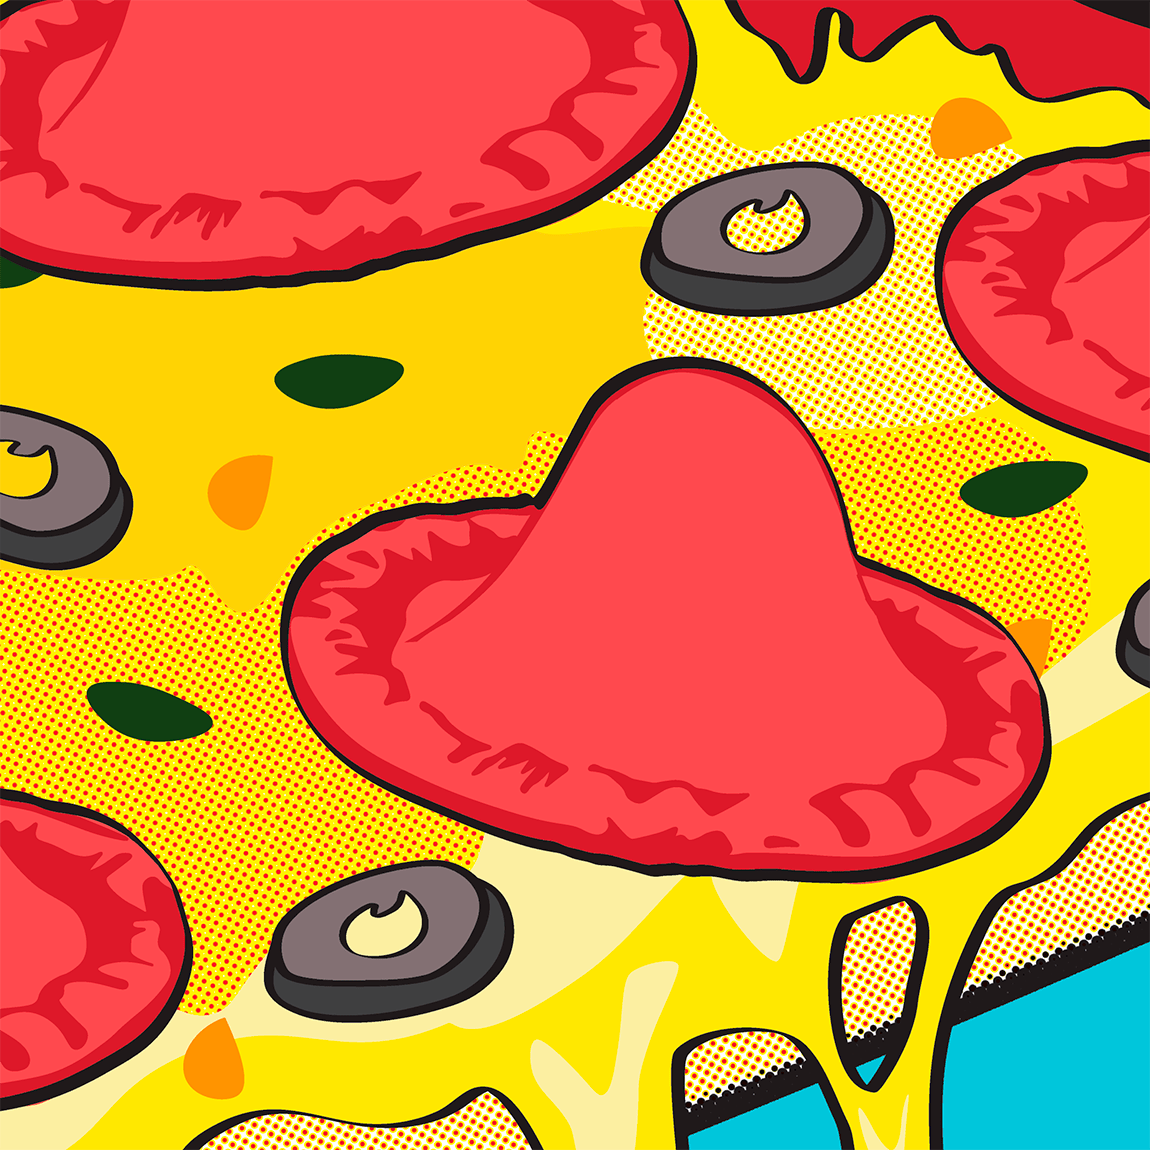 More-Pepperoni-Please-Crop-1